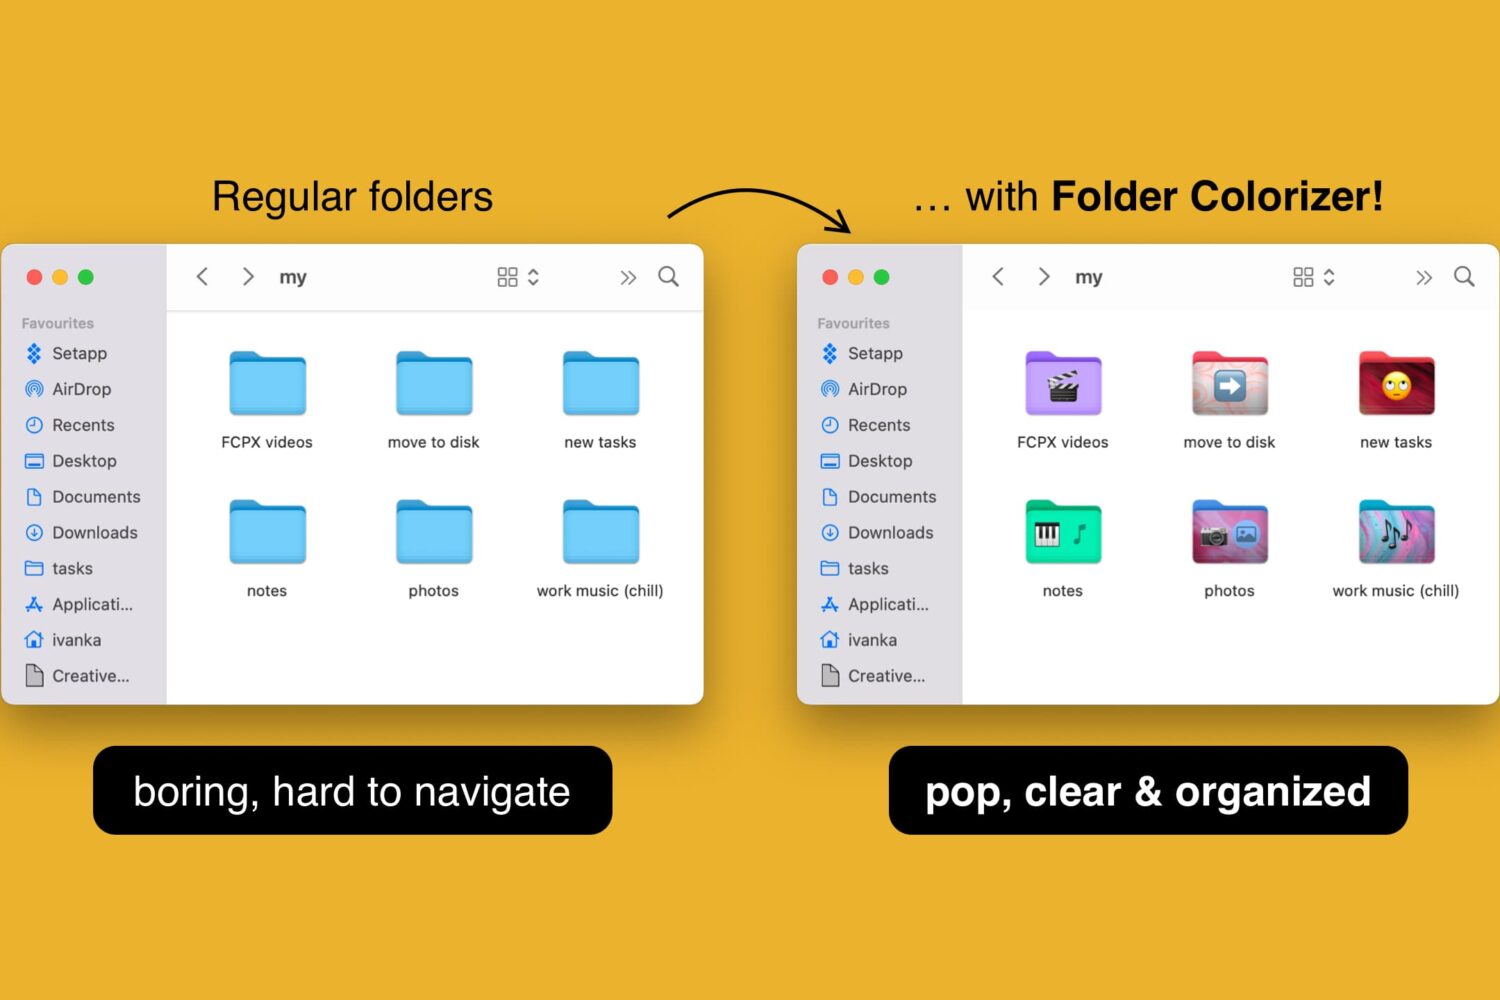 A marketing image from Softorino showcasing its Folder Colorizer app for Mac that makes it easy to change macOS folder color, customize folder icons with emoji, decals, custom image backgrounds and more